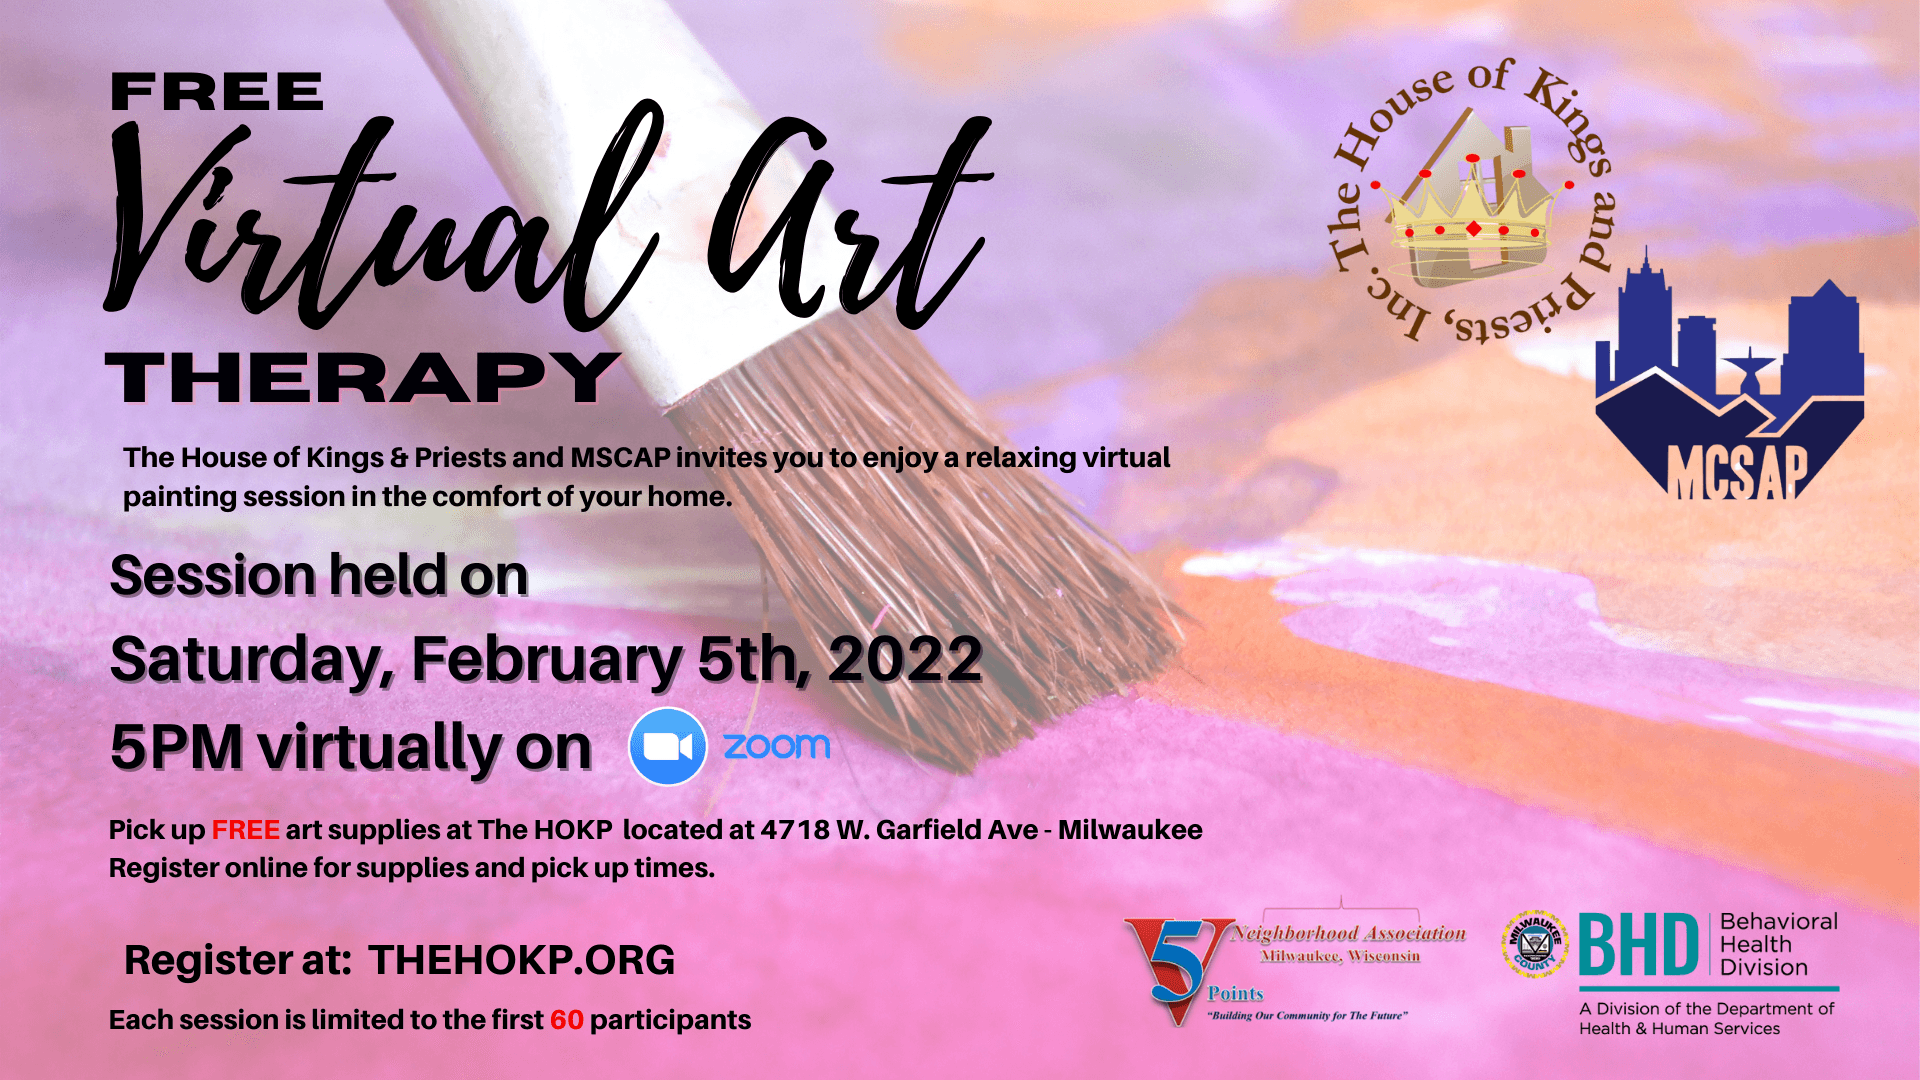 house of kings and priests art therapy flyer mcsap